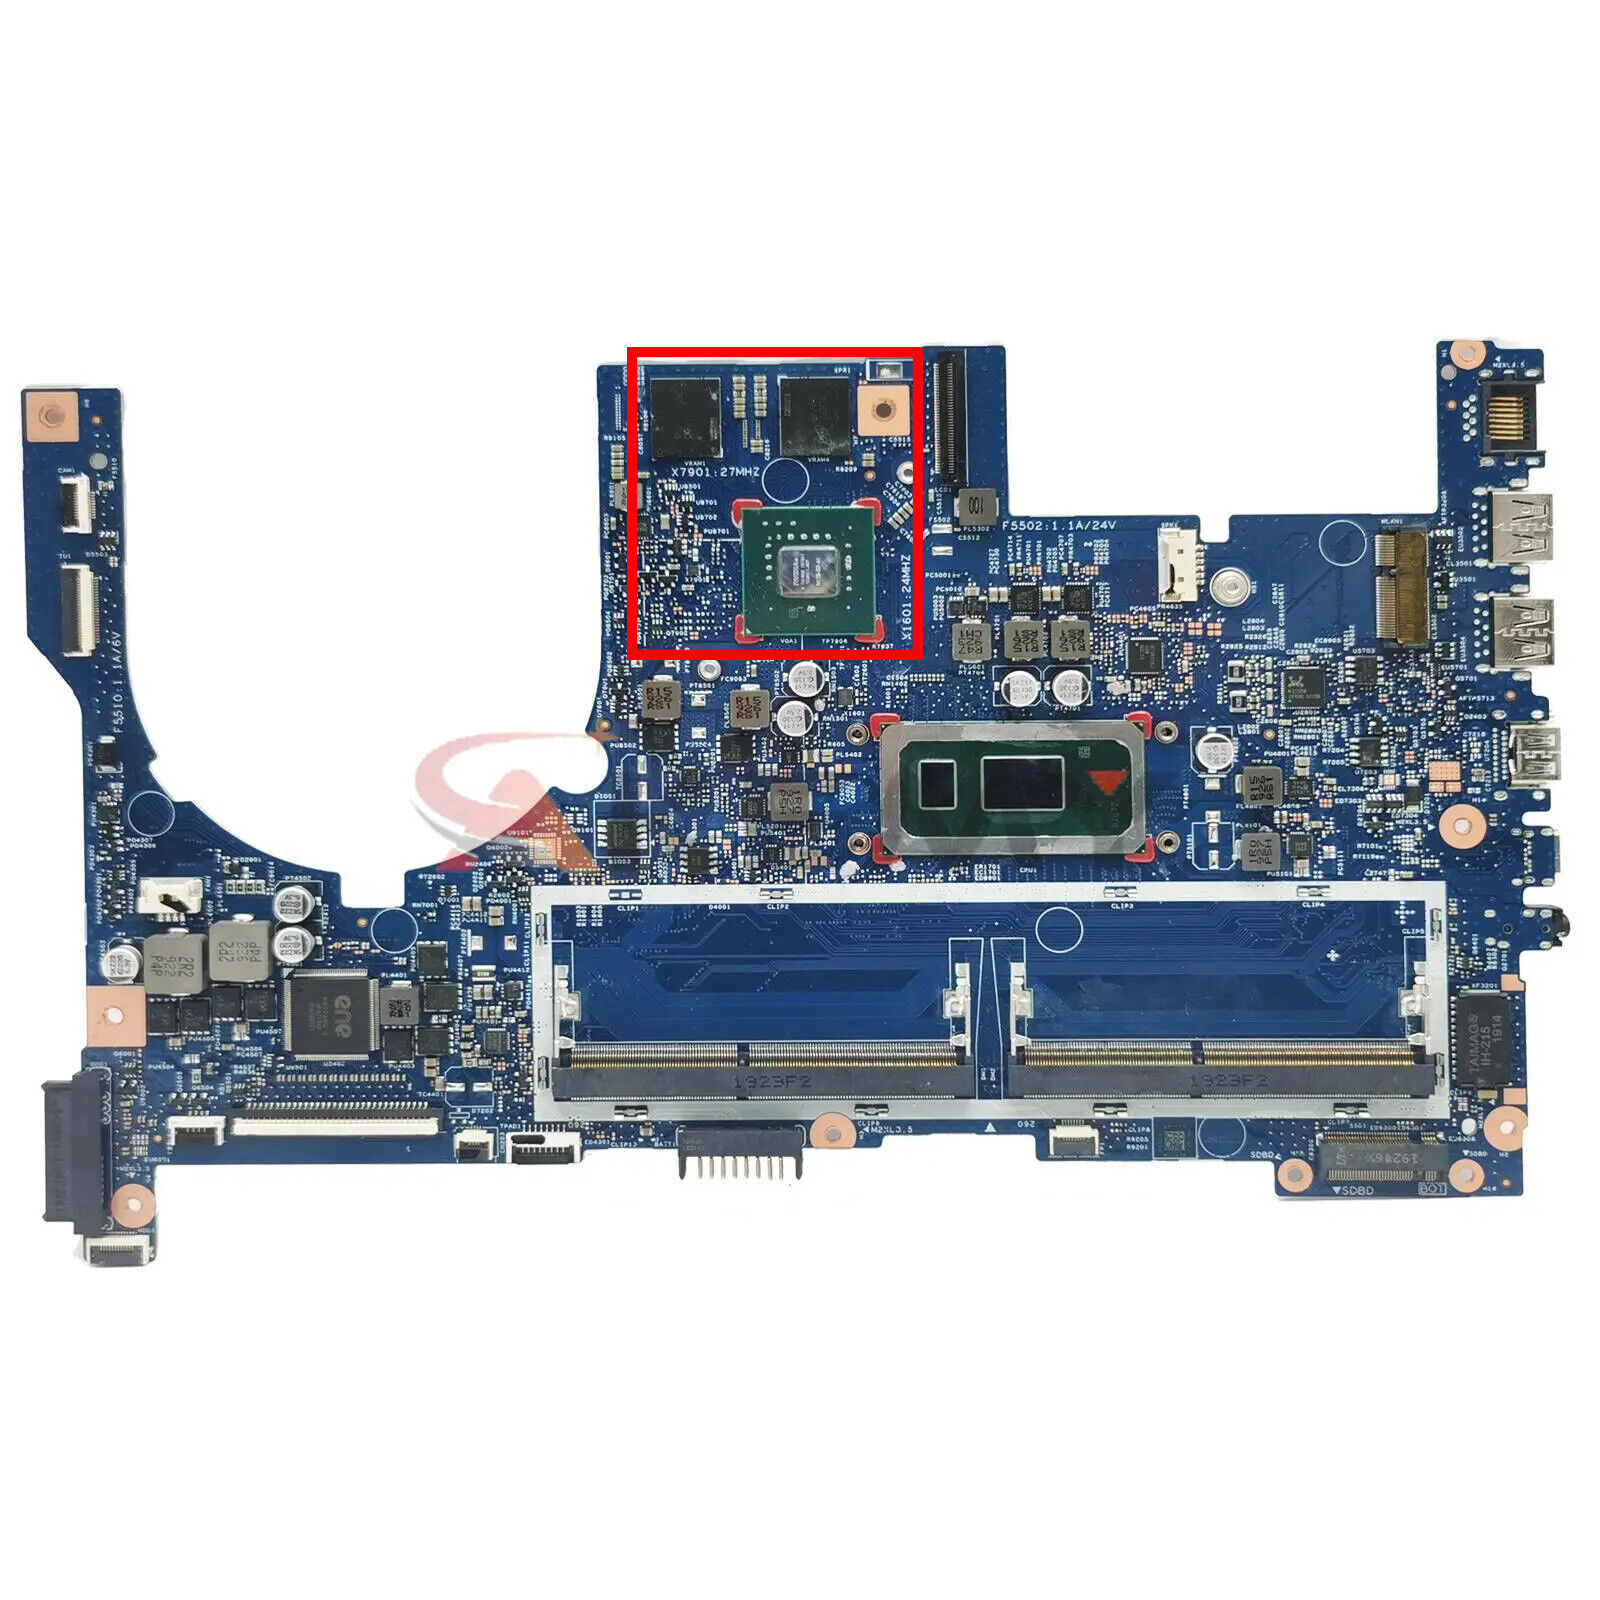 18739-1 mainboard For HP envy 17-CE motherboard W/ I5 I7 CPU MX250 4GB 